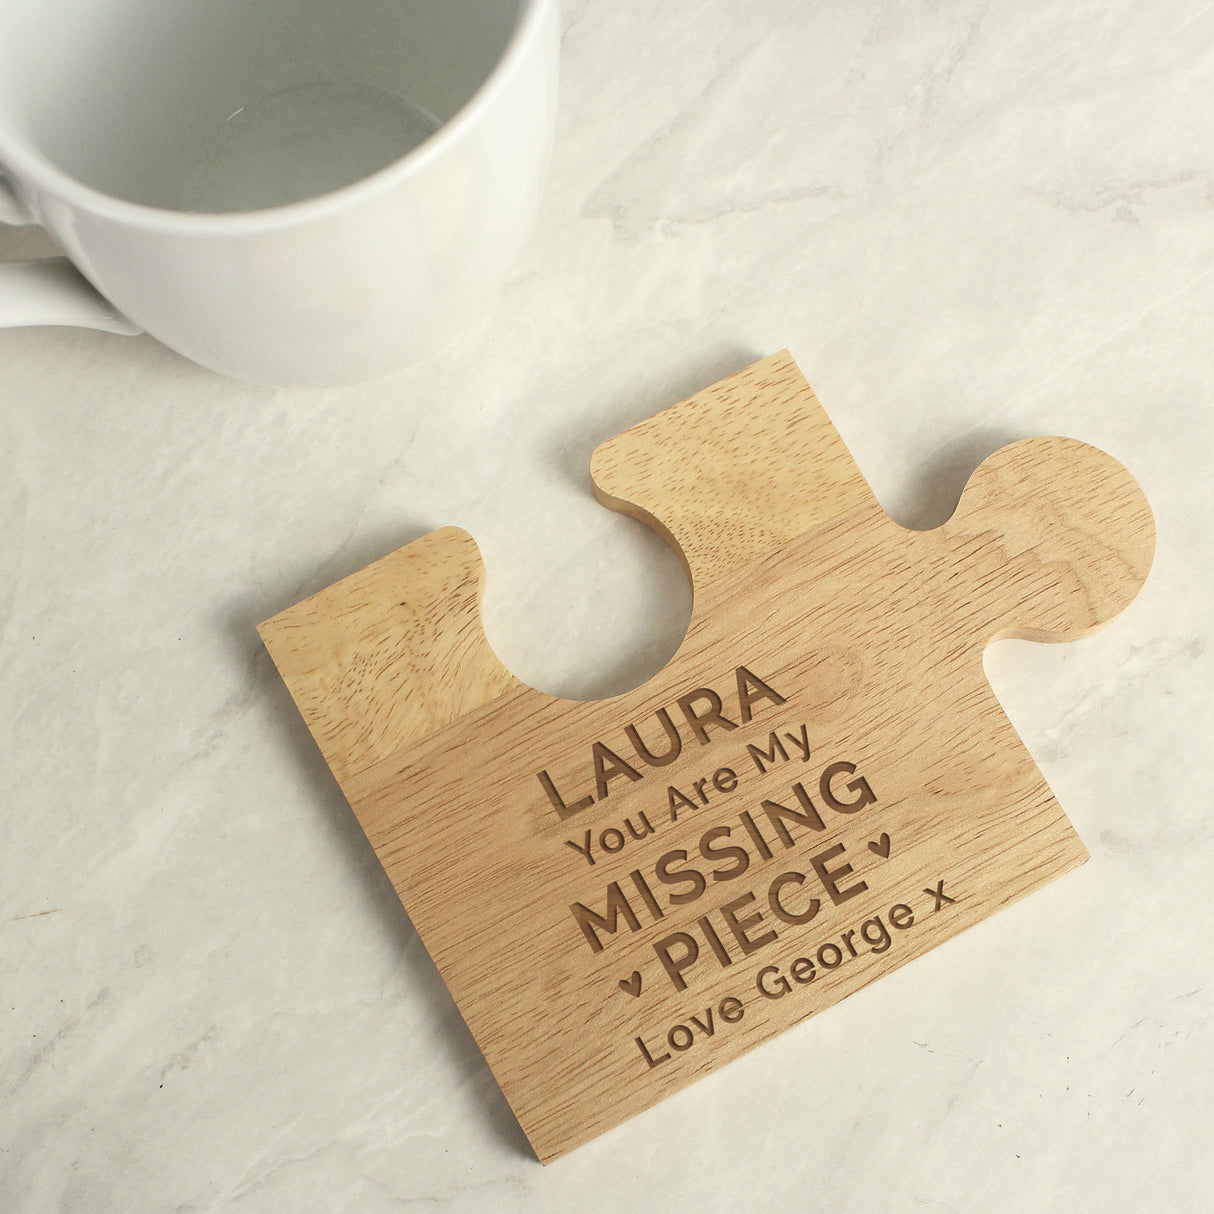 My Missing Piece Jigsaw Piece - Gift Moments